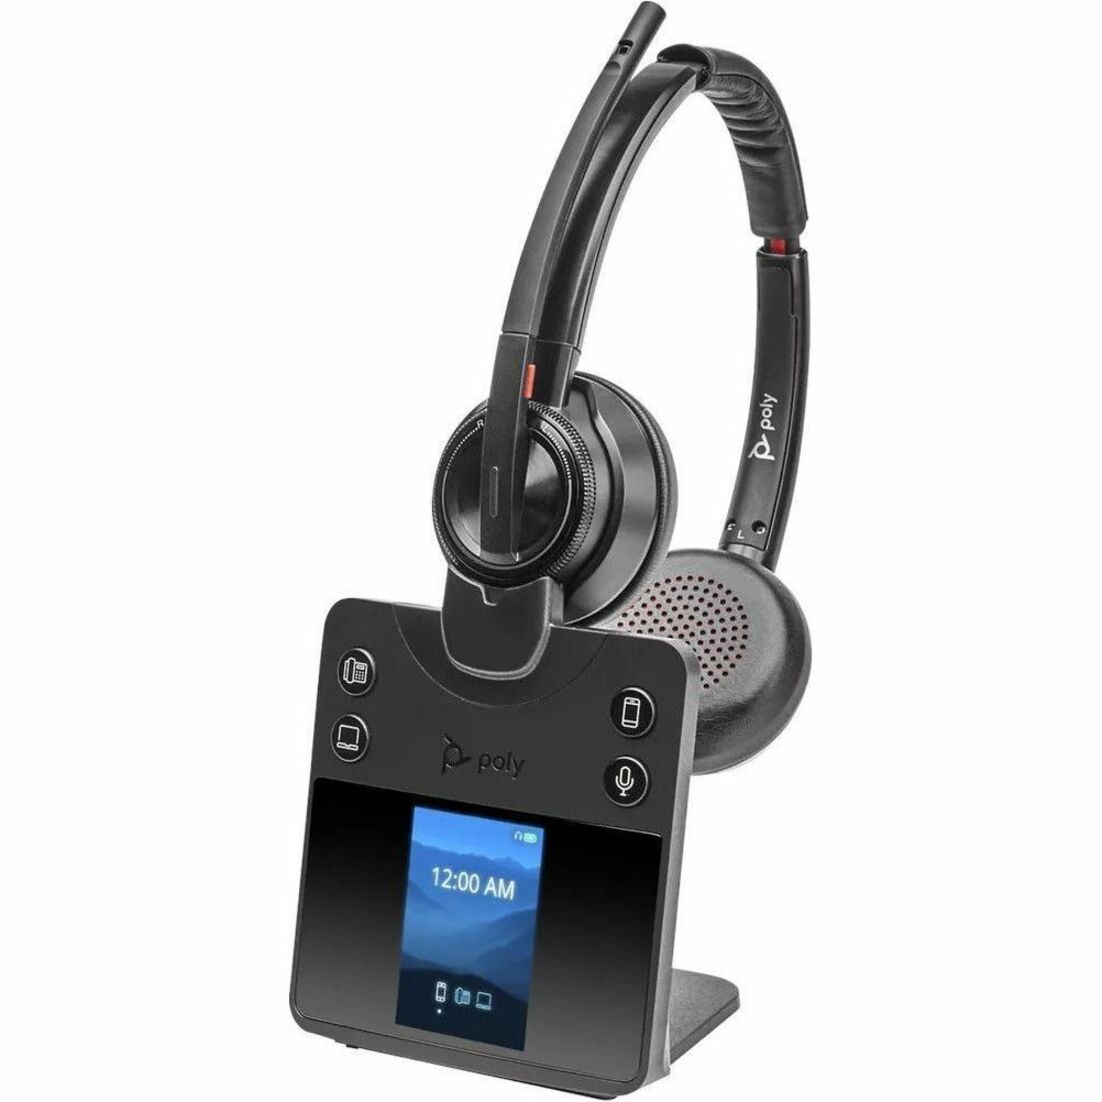 Poly 2-221104-201 Savi 8400 Office 8420 Headset, Binaural Over-the-head Wireless Bluetooth/DECT 6.0 Headset with Noise Cancelling, Volume Control, and Microsoft Teams Certification